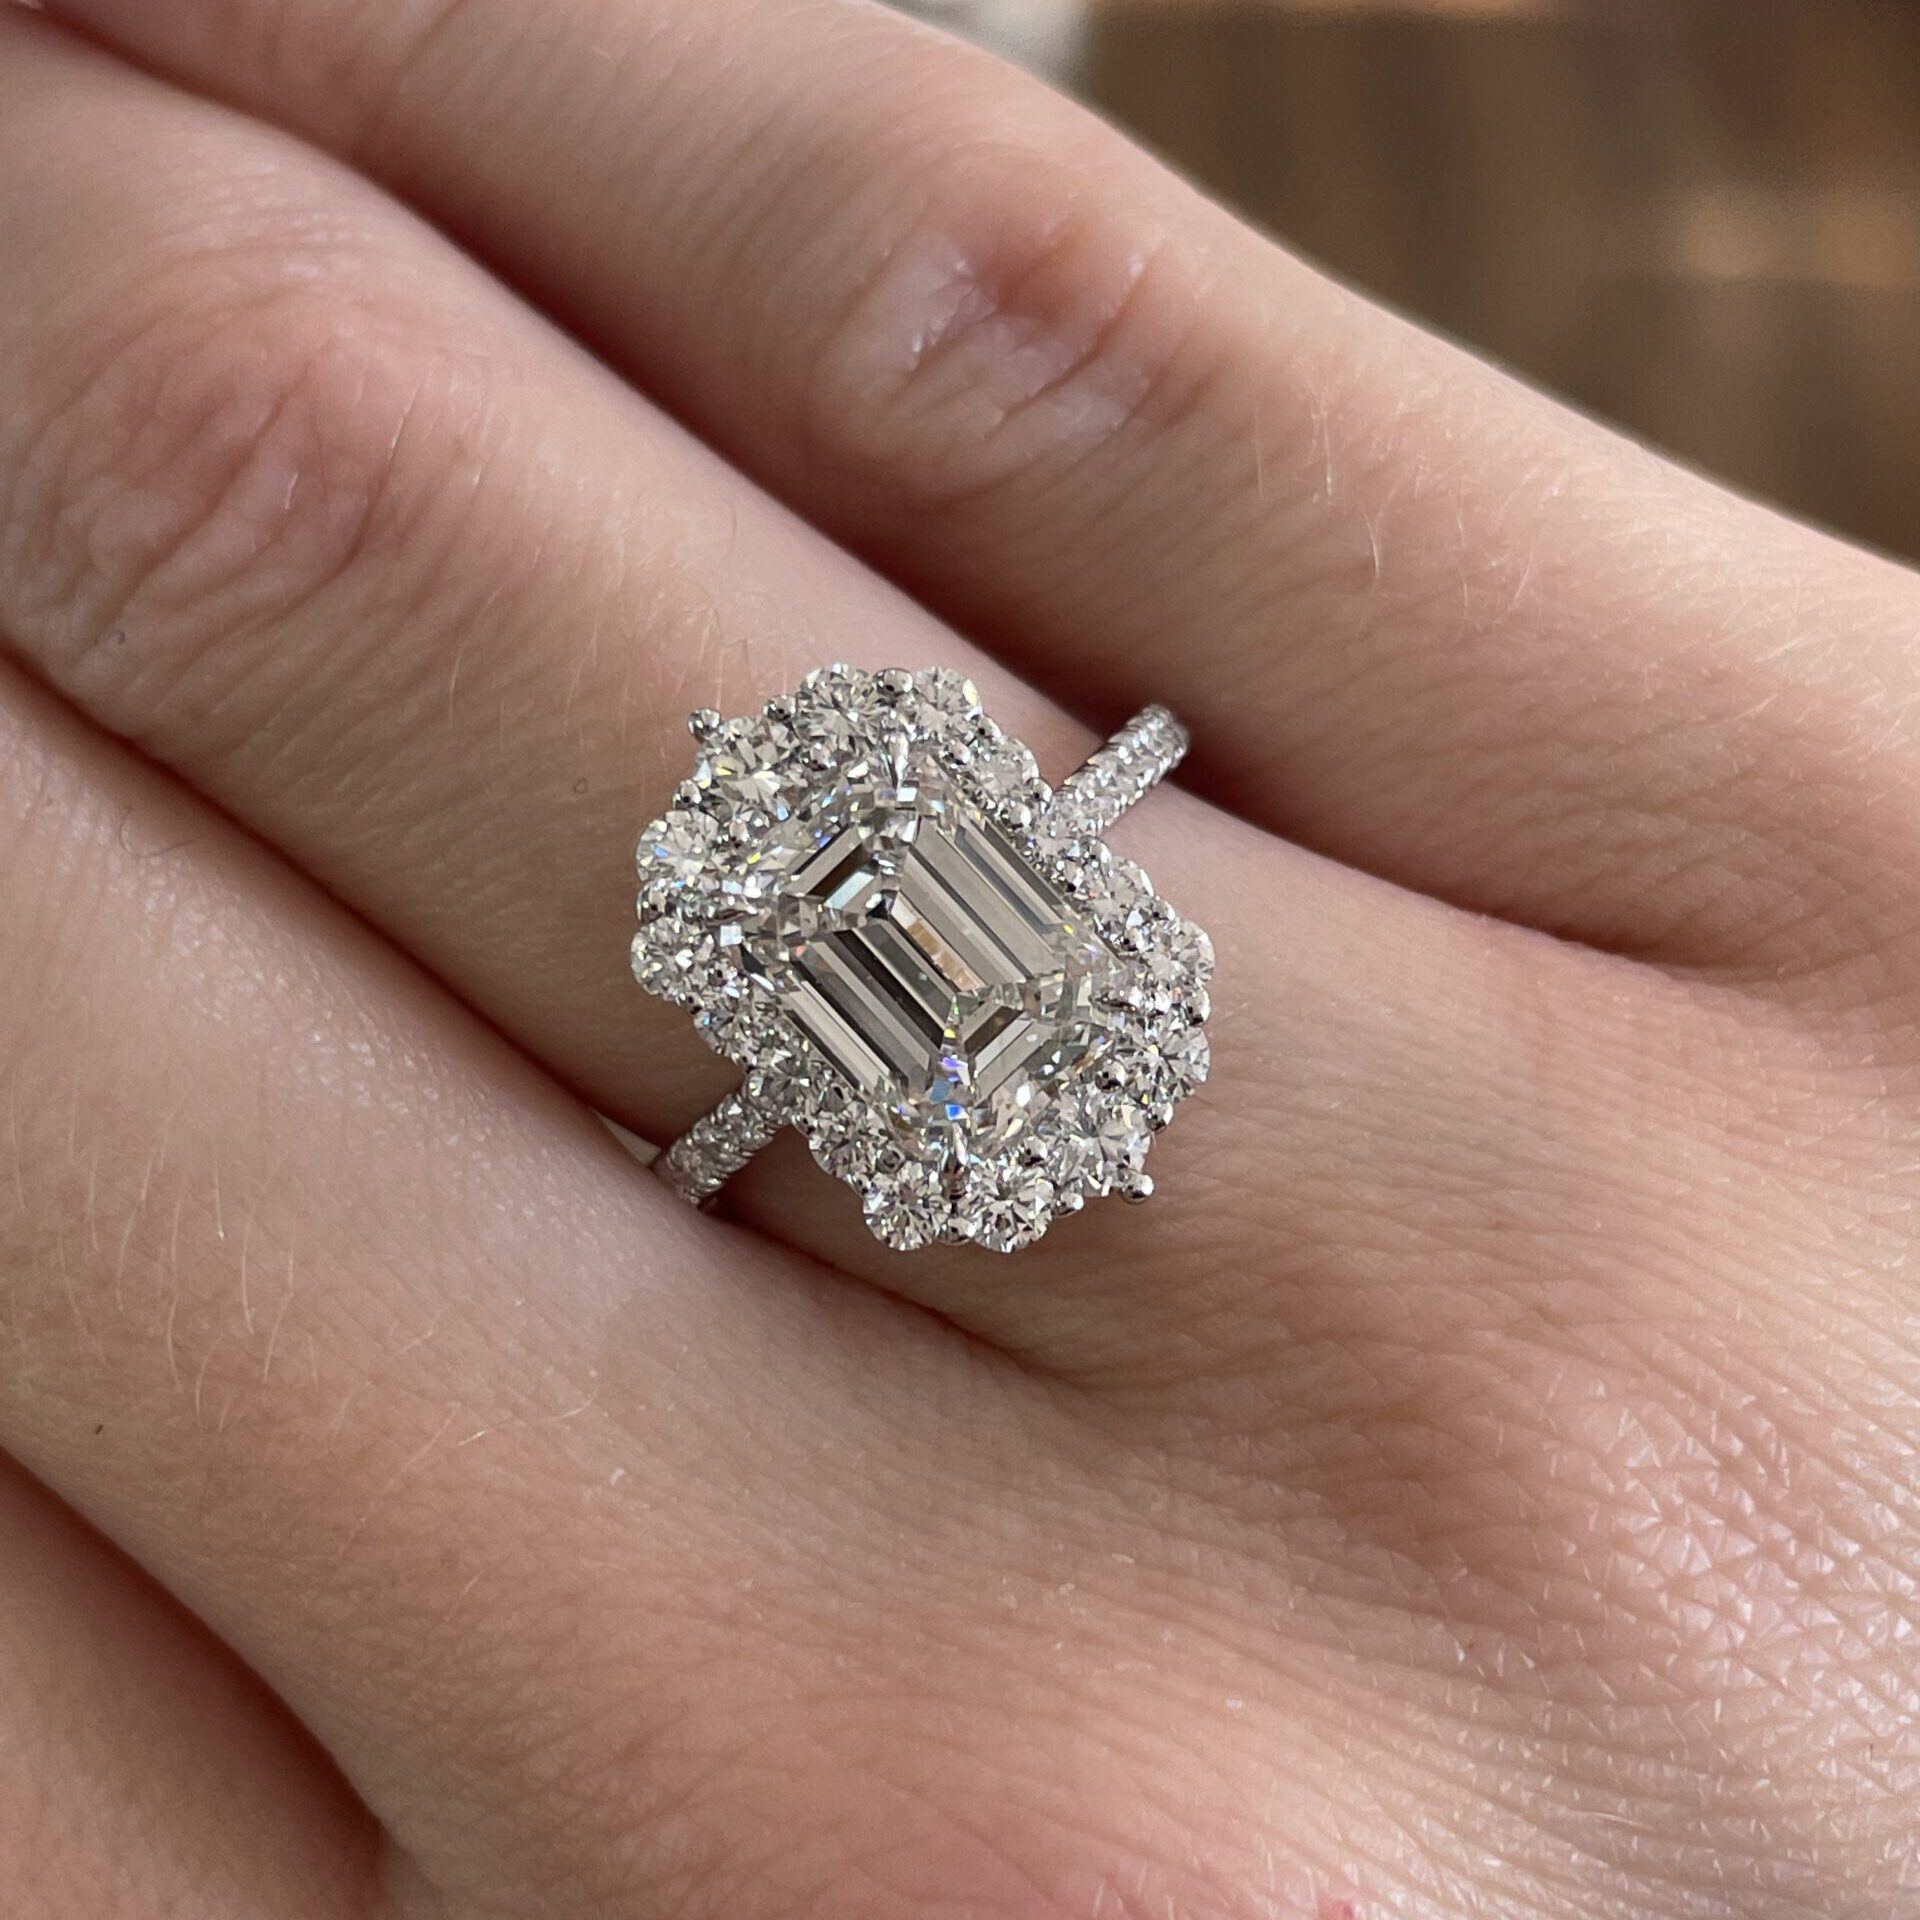 Emerald cut diamond engagement ring with a halo